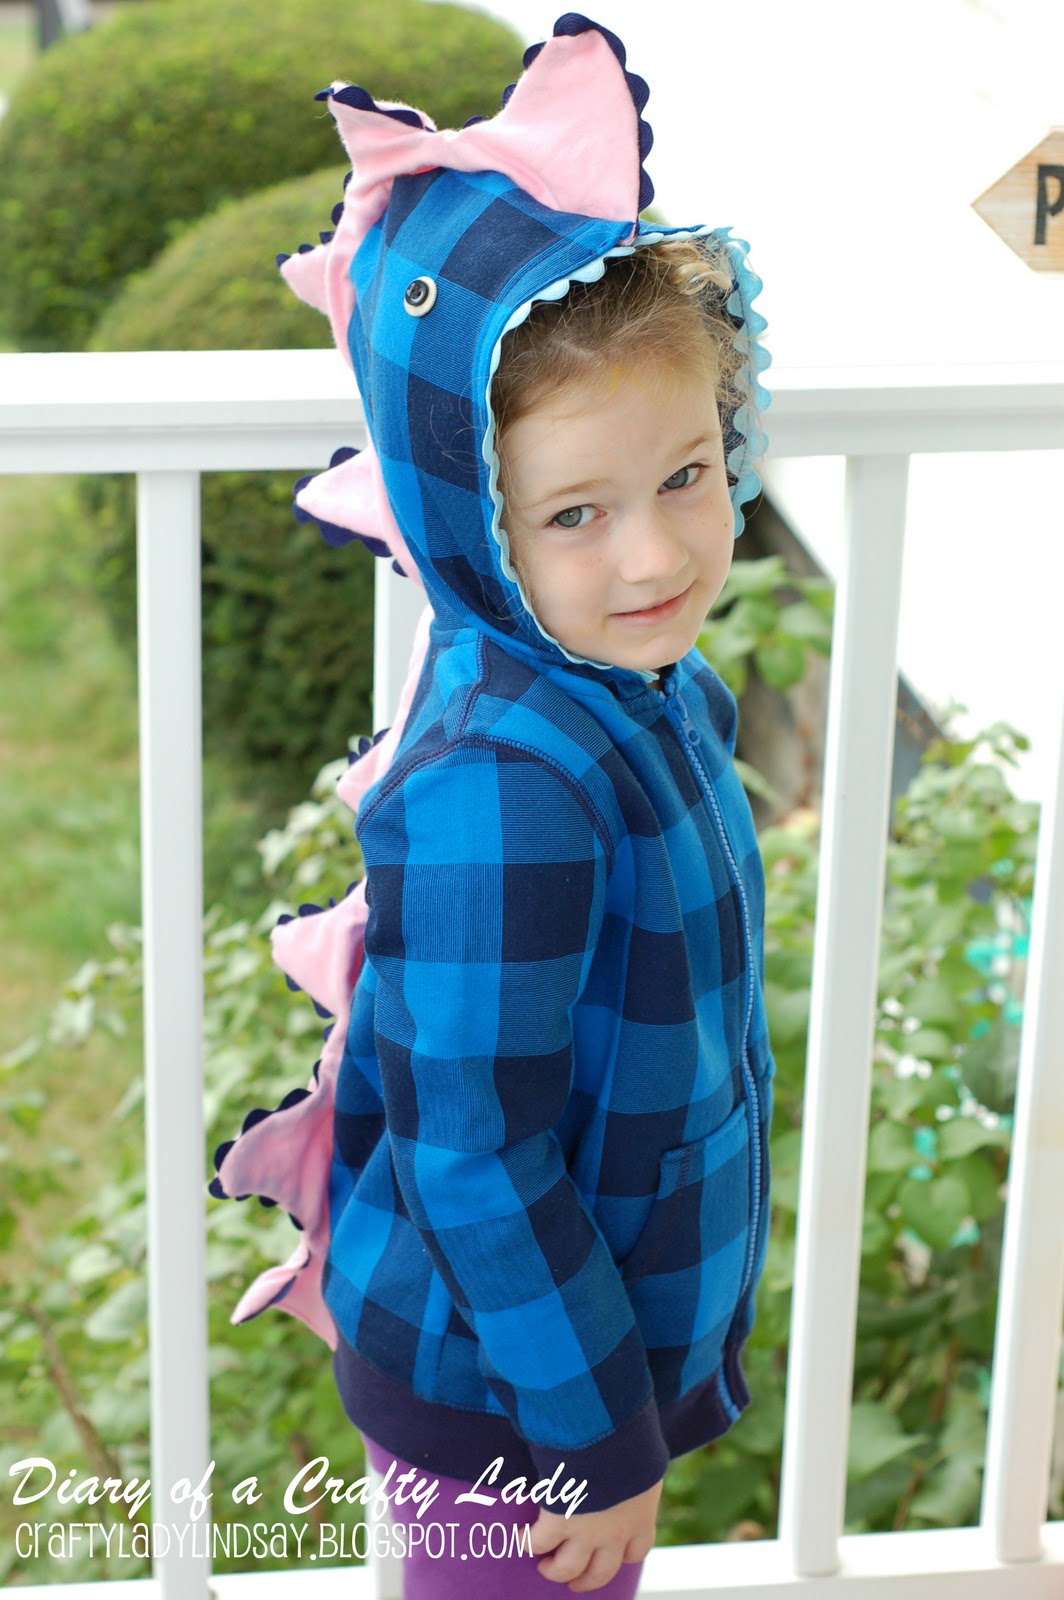 Diary of a Crafty Lady: Dragon Hoodies